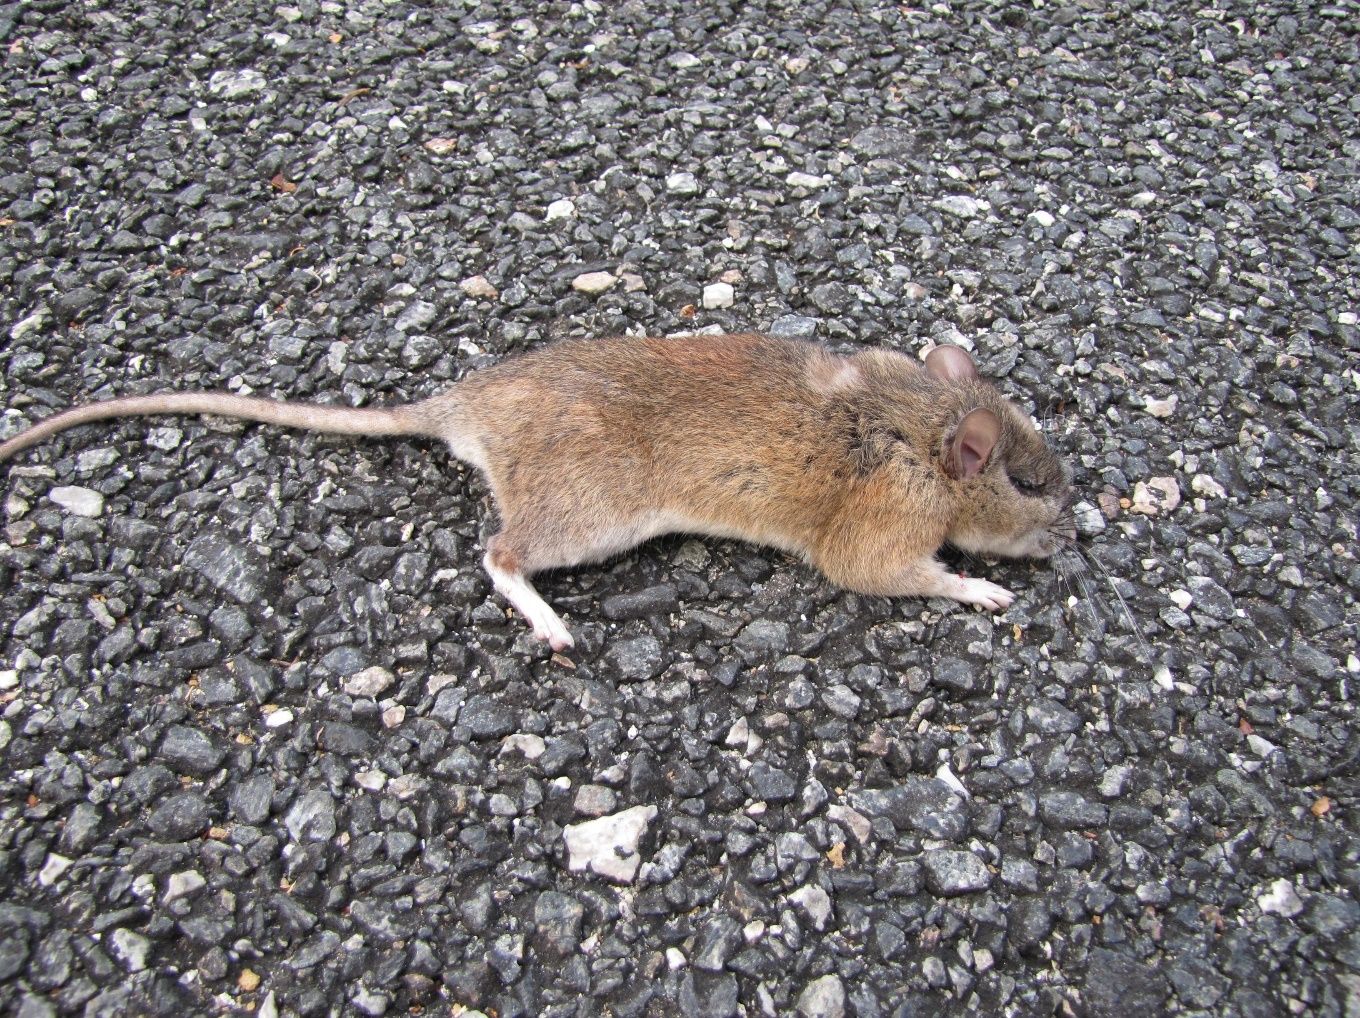 Vehicle collisions are a substantial source of direct mortality for wildlife, such as this woodrat.